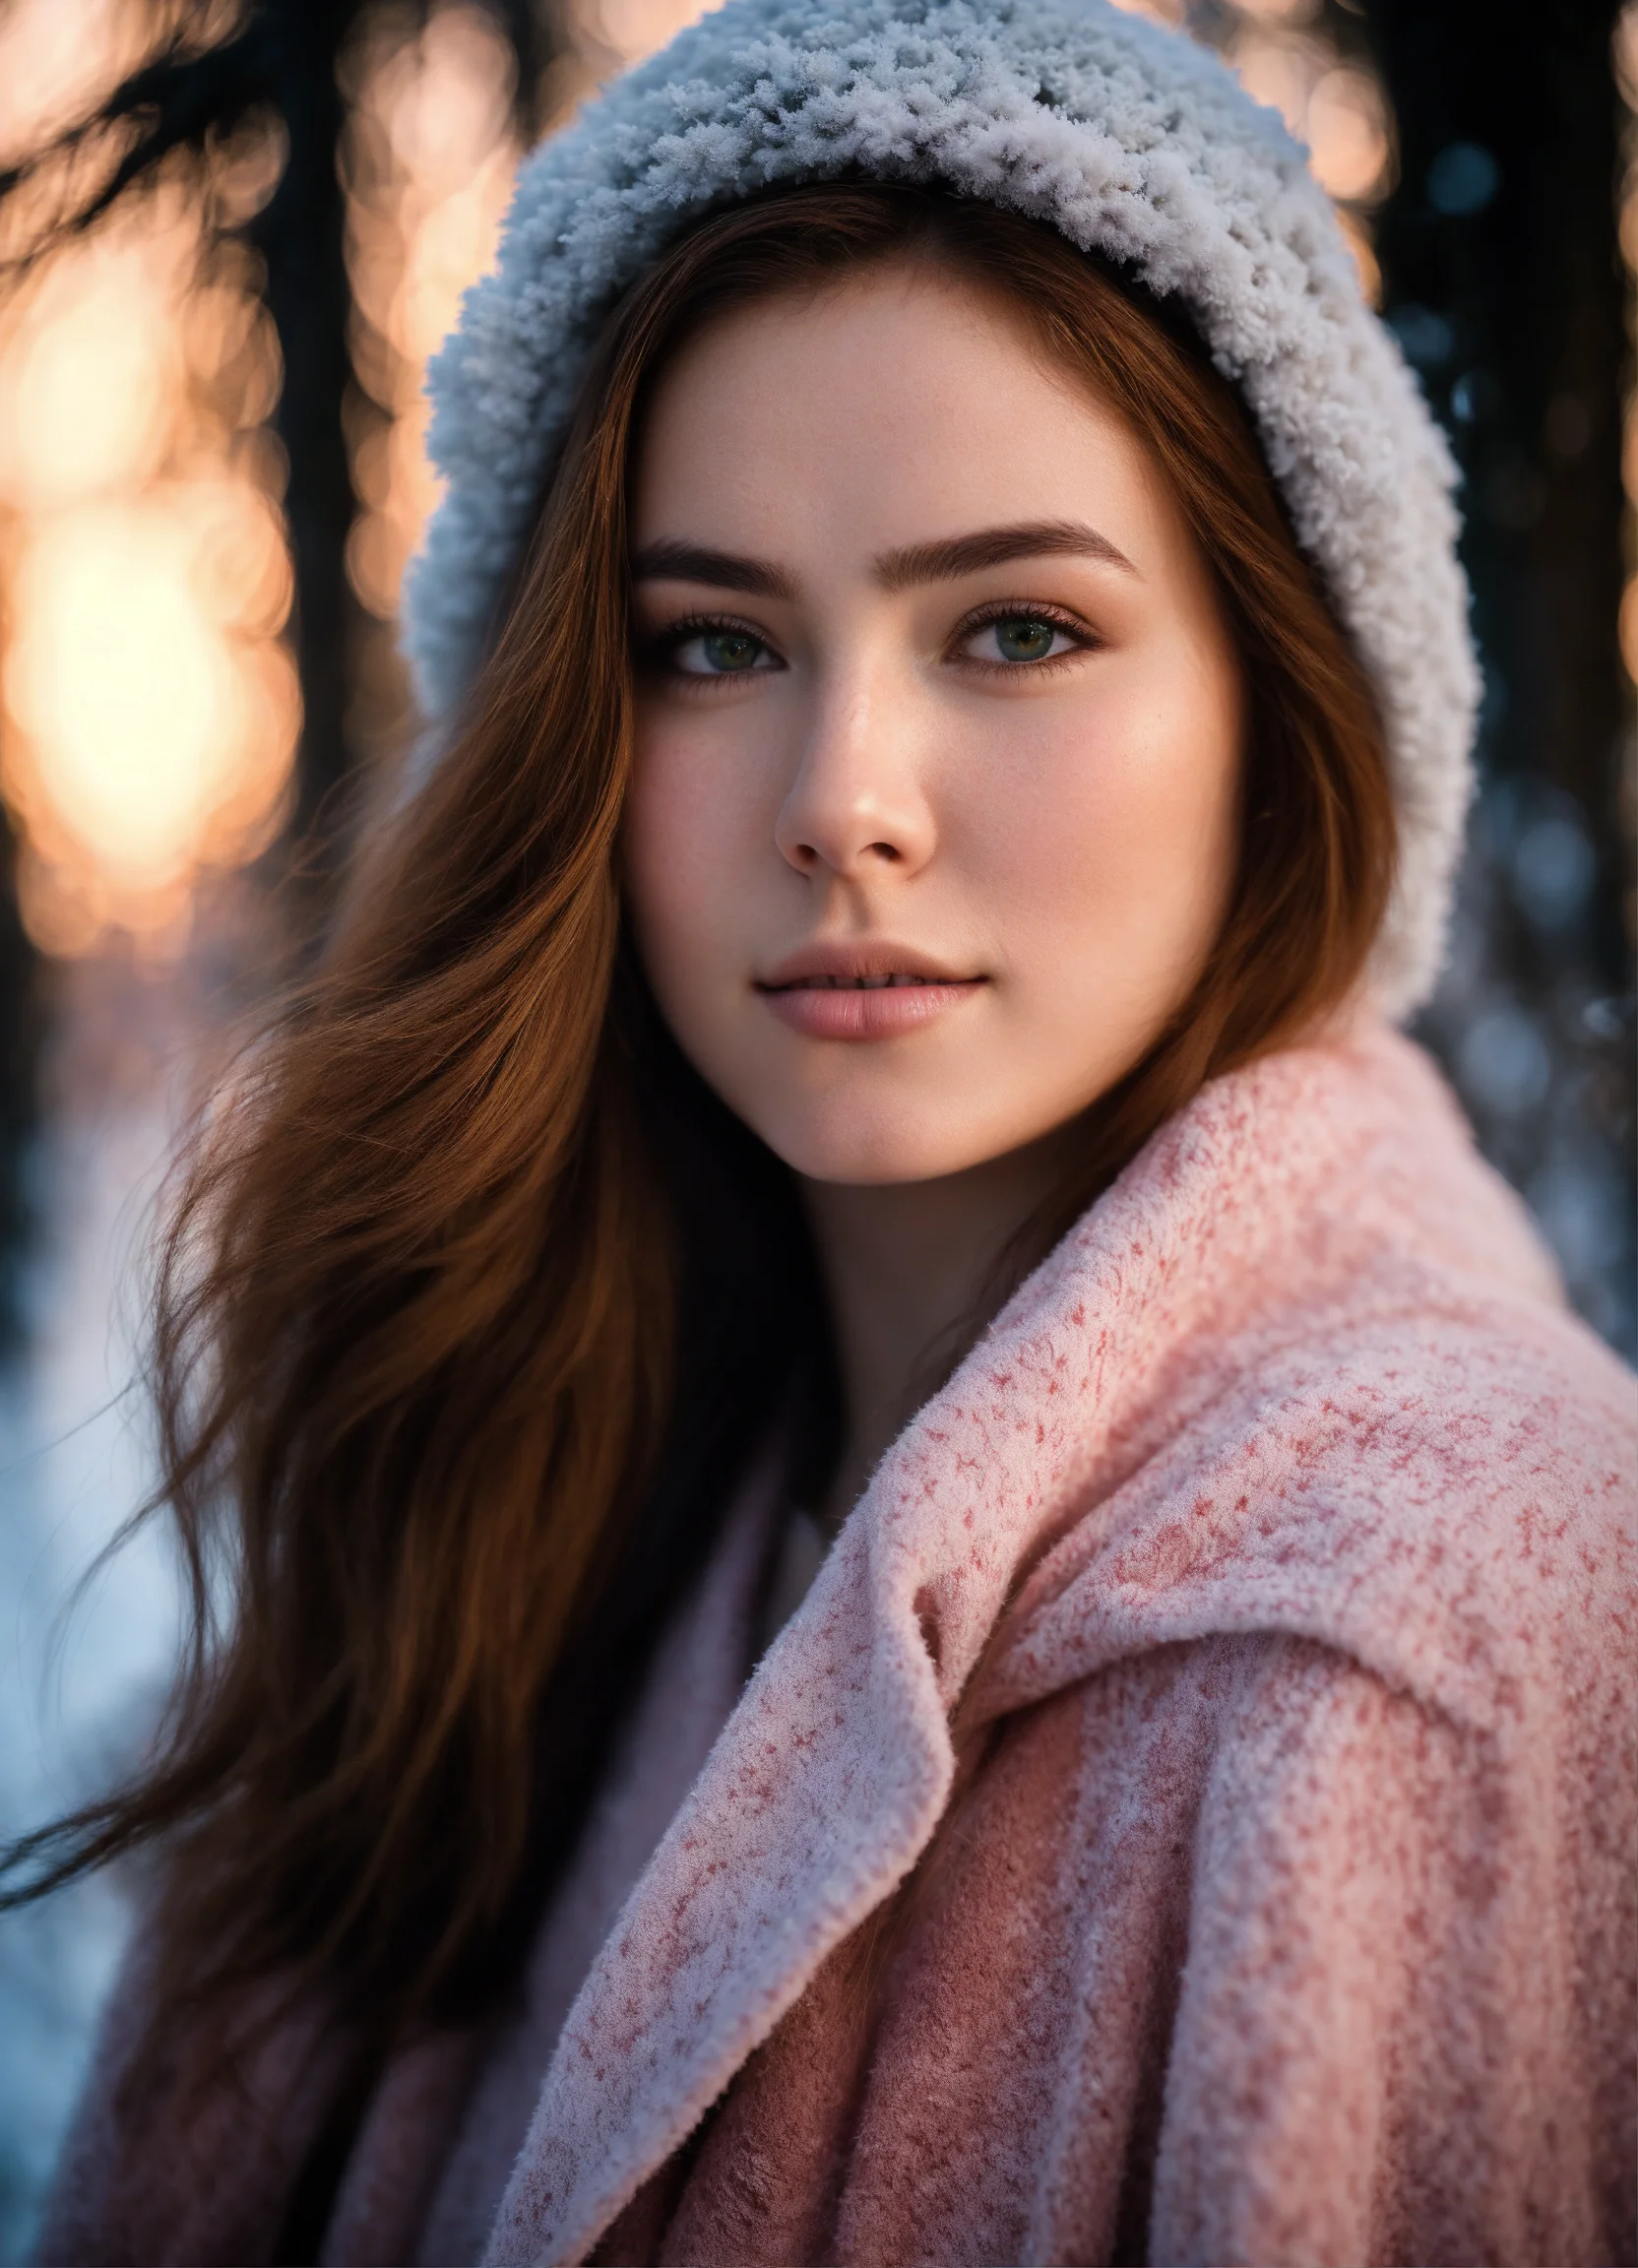 Lexica - Beautiful woman meets dawn in winter pine forest, close-up ...